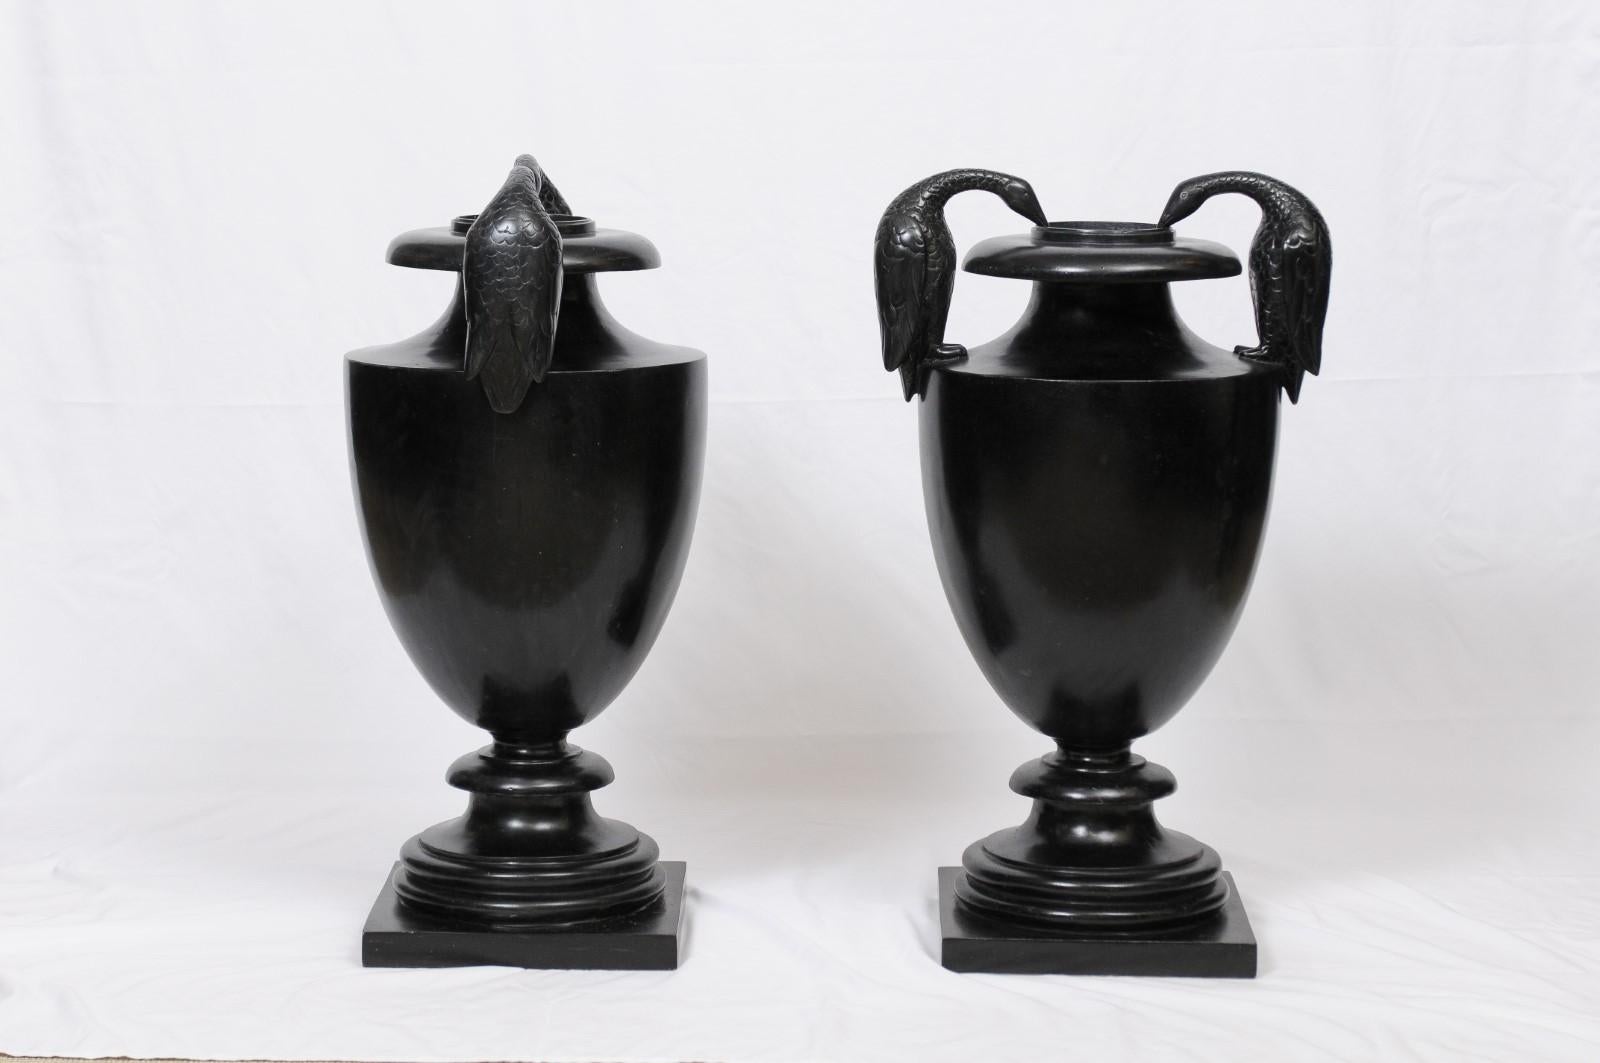 Classical Urn with Cormorant Handles Cast in Black Wax Stone 2